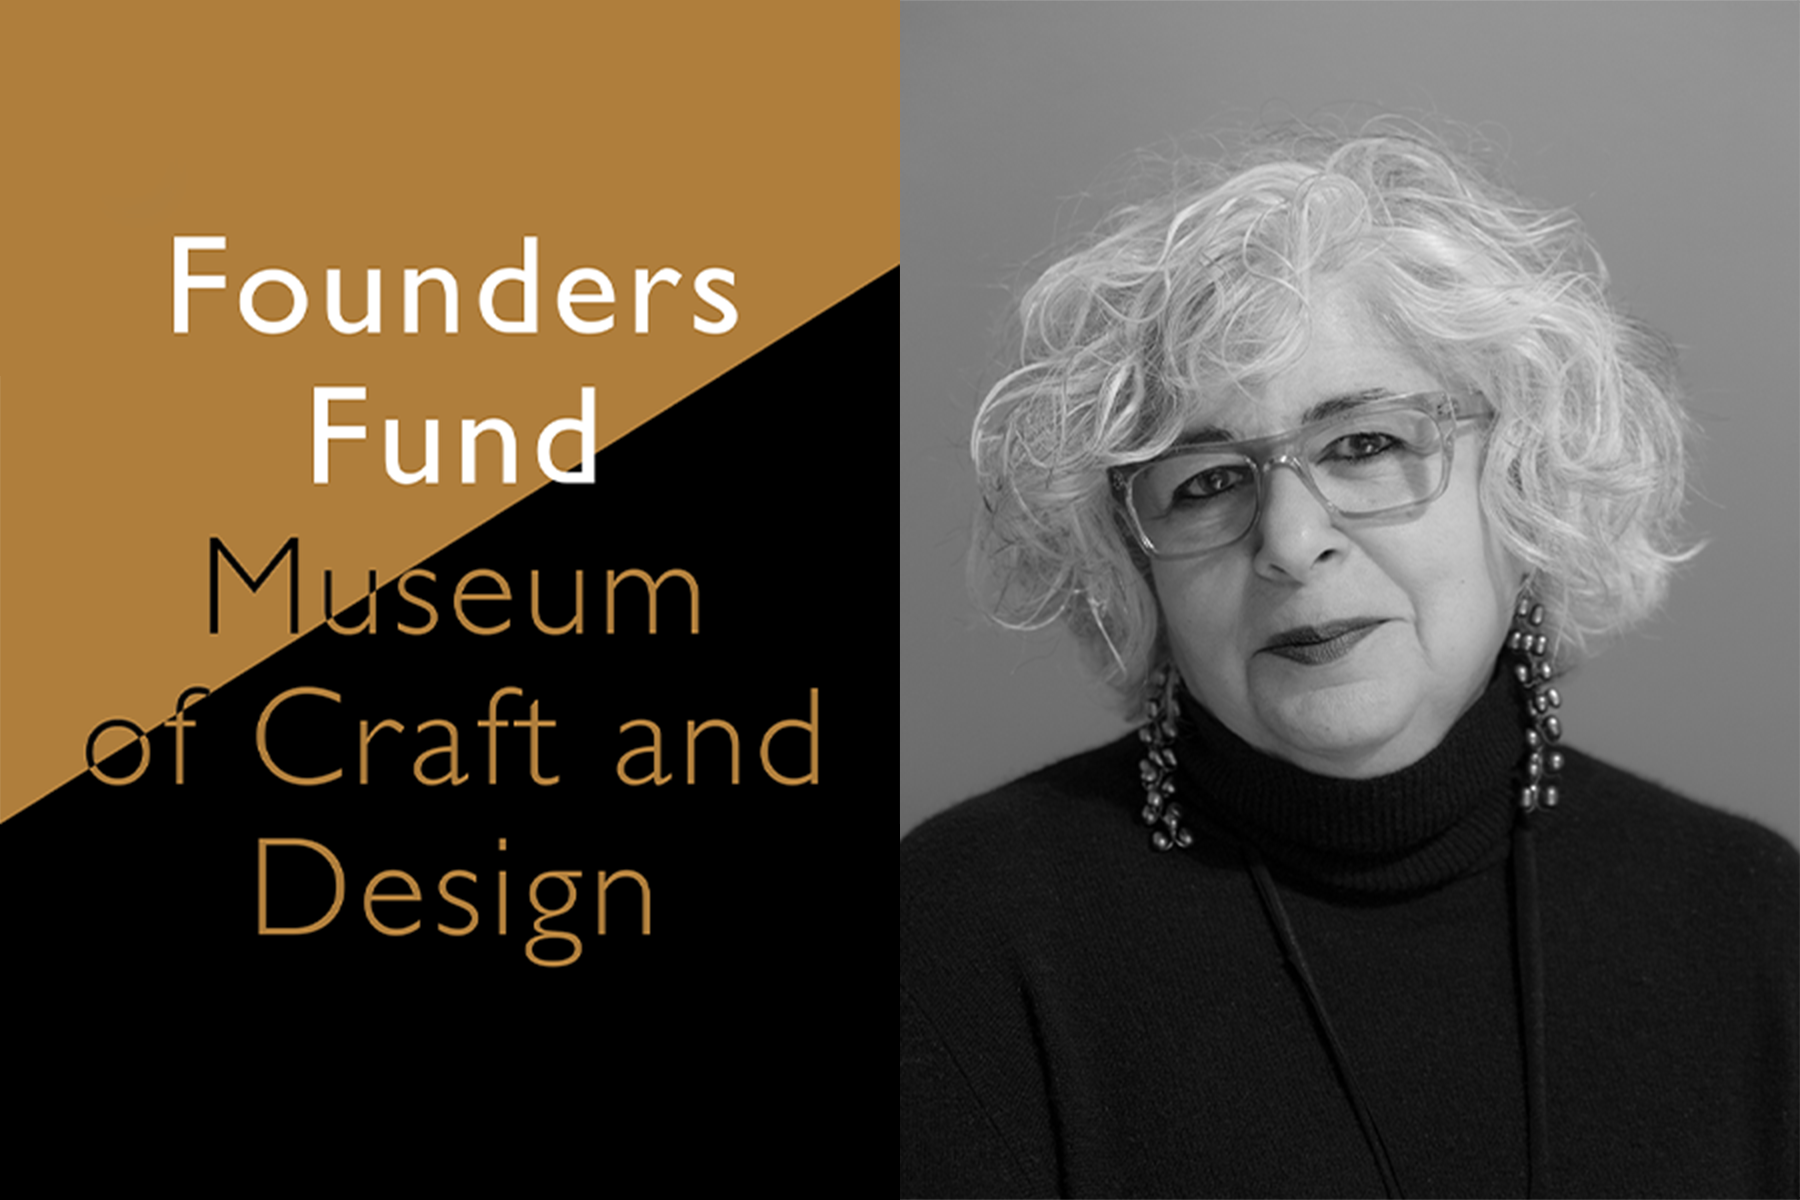 Logo of gold and black with the text "Founders Fund Museum of craft and Design" on the left side and a headshot on the right side.